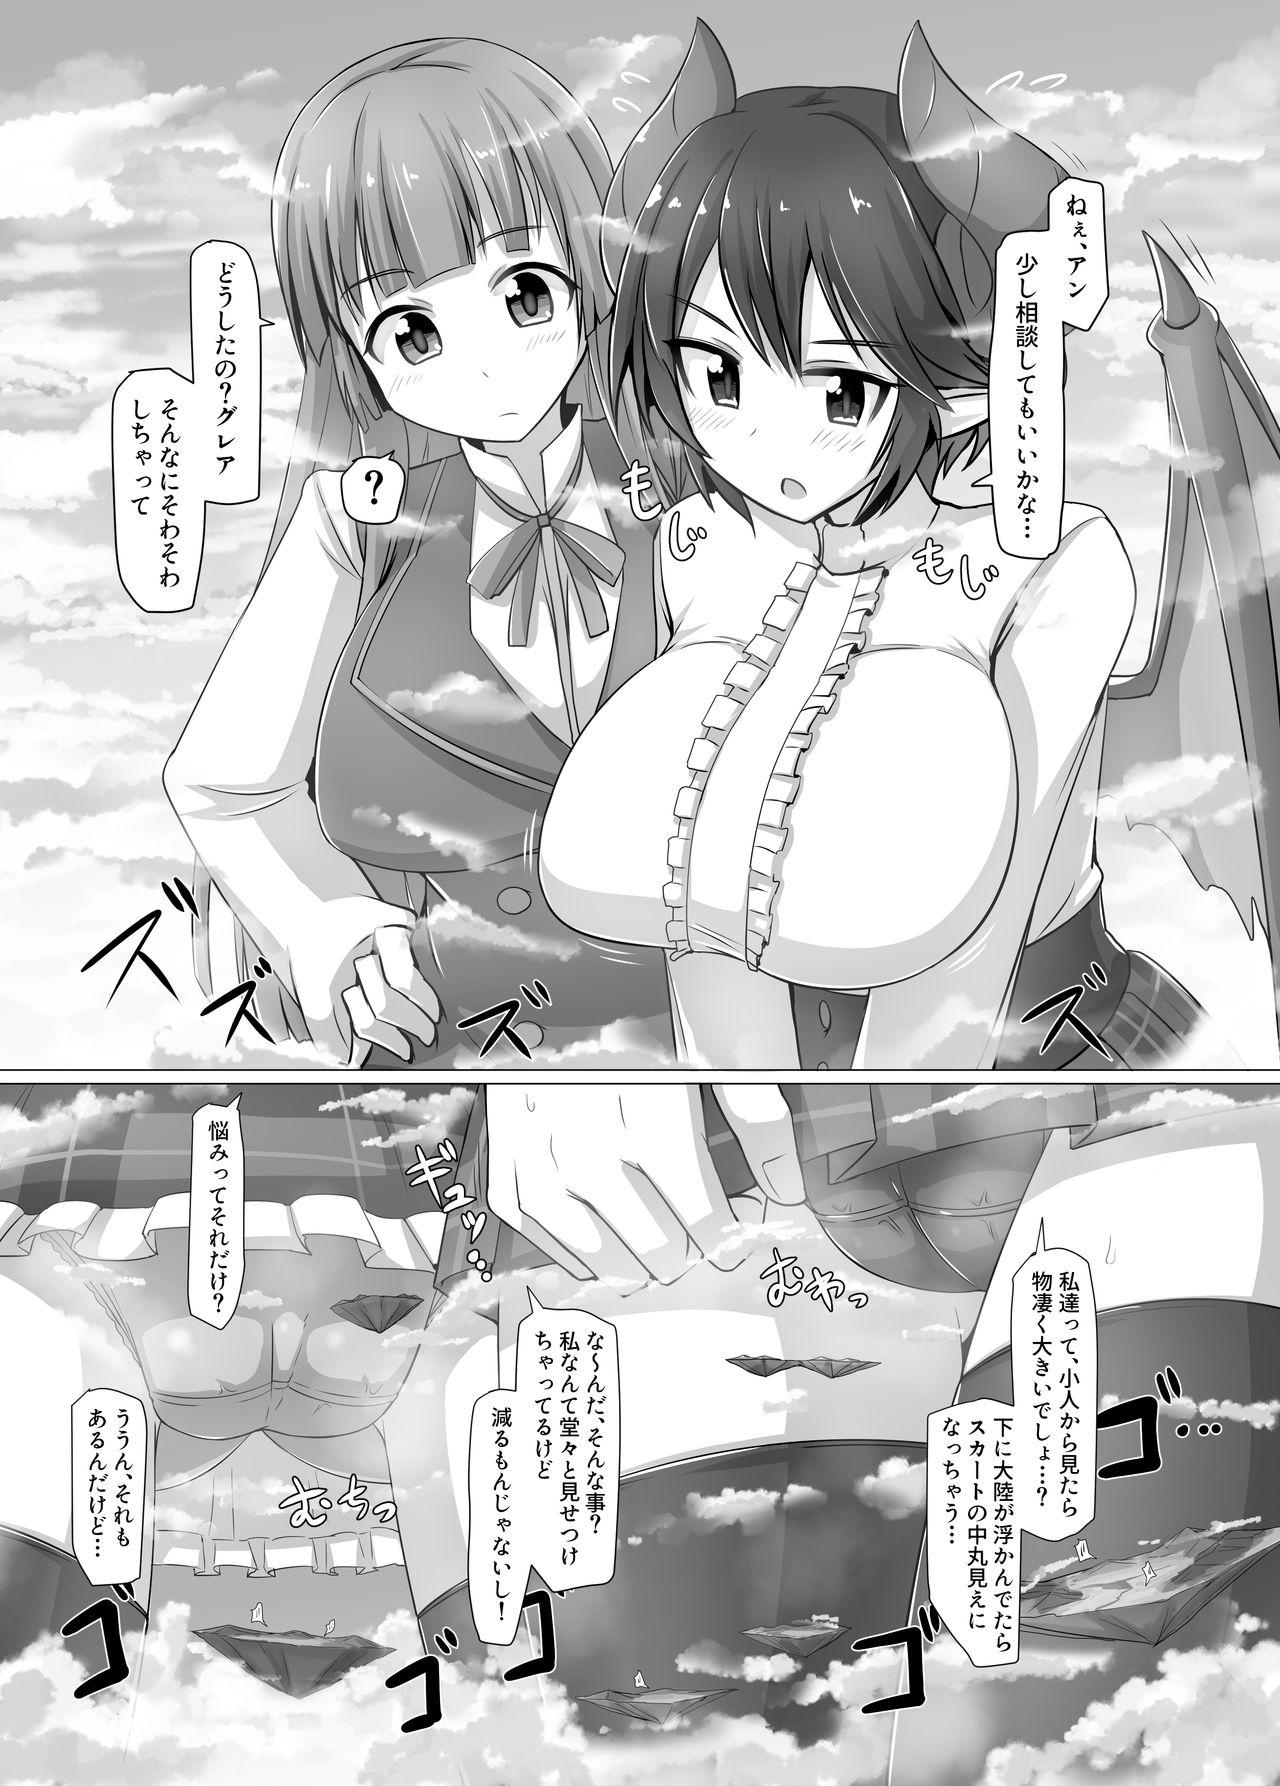 Letsdoeit Gigantic Gas Situation - Rage of bahamut Manaria friends Spoon - Page 2